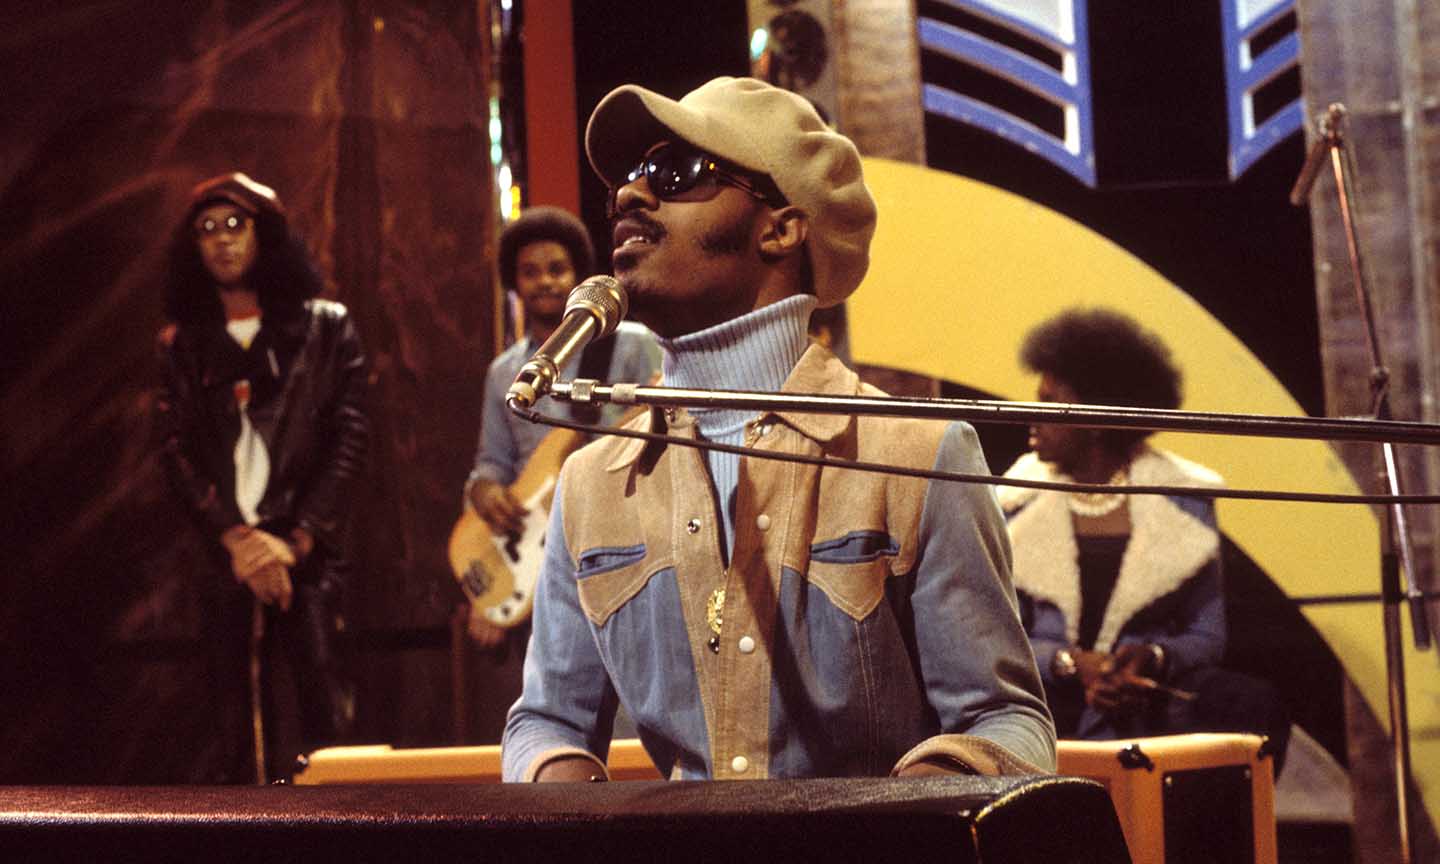 70s Motown: How “The Sound Of Young America” Came Of Age